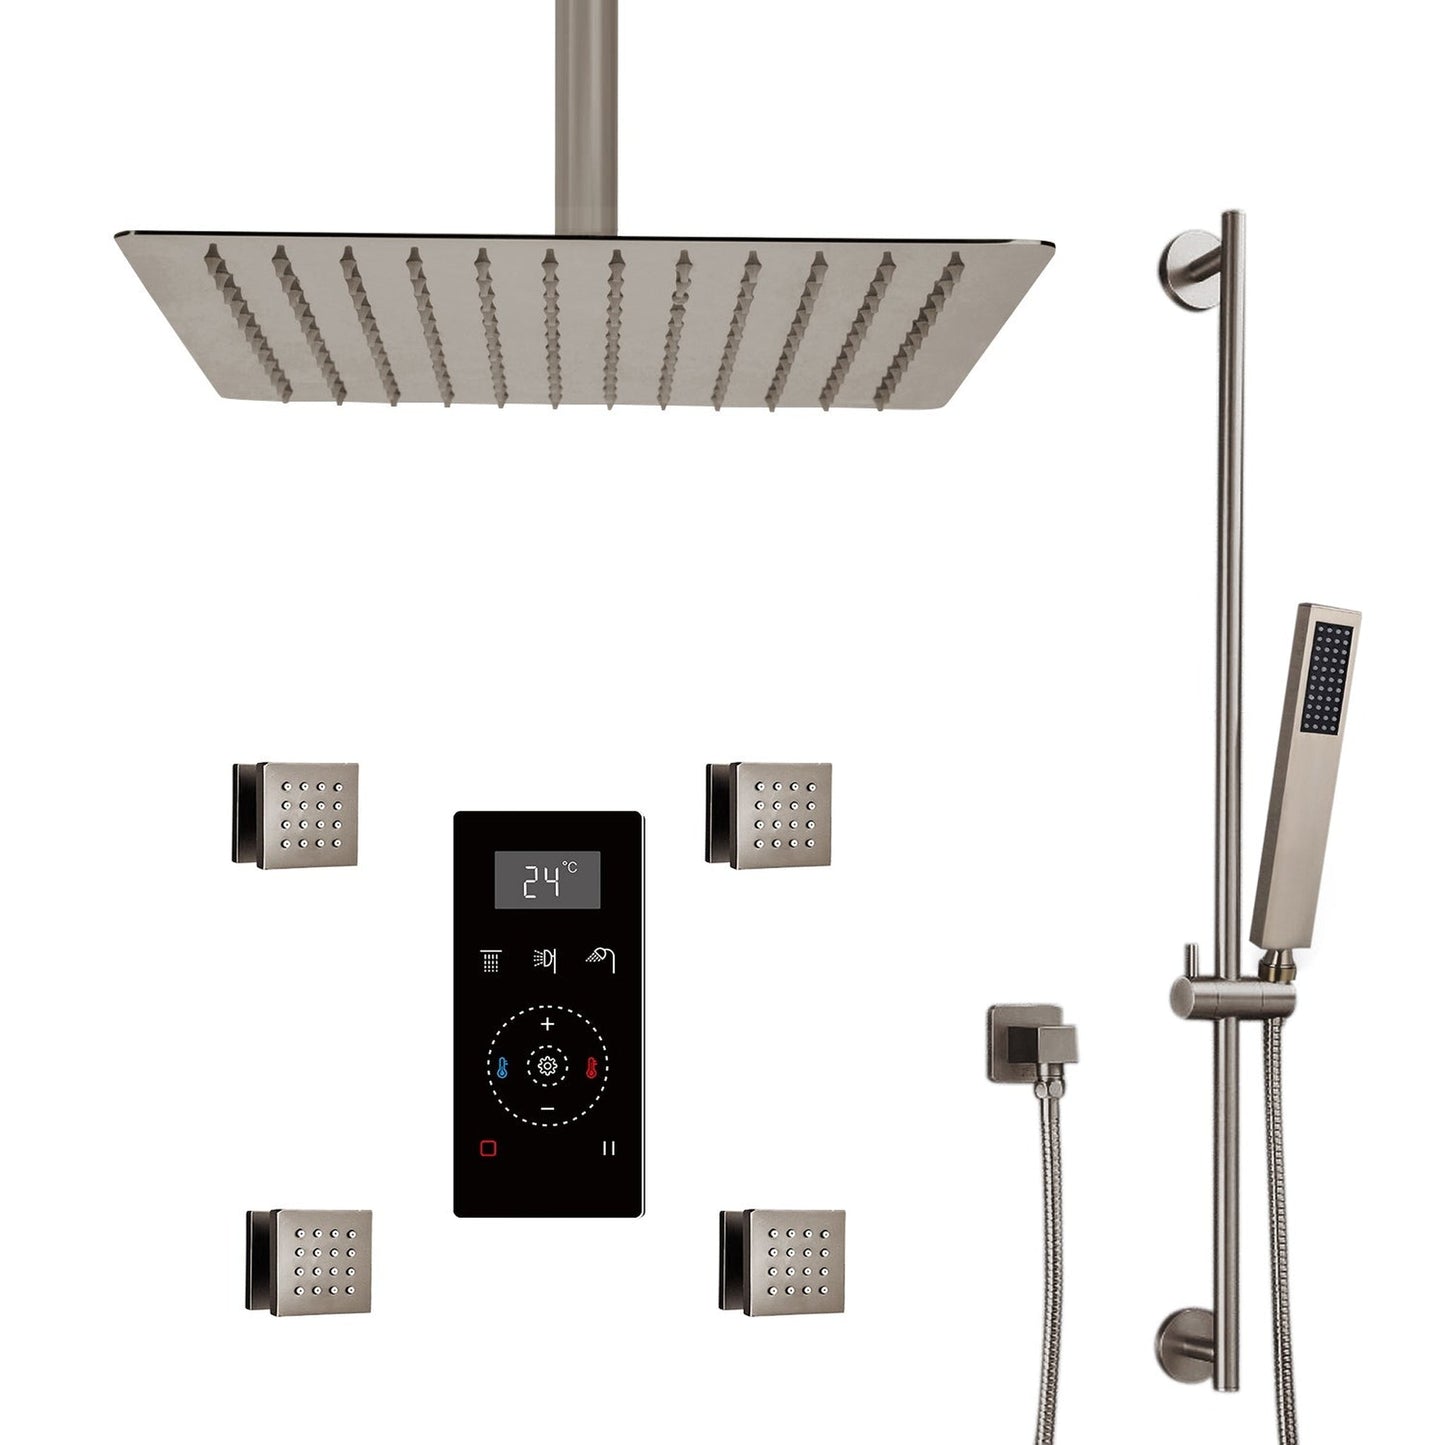 Fontana 12" Brushed Nickel Ceiling Mounted Rainfall Digital Thermostat Mixer Shower System With 4-Jet Body Spray, Hand Shower and Without Water Powered LED Lights